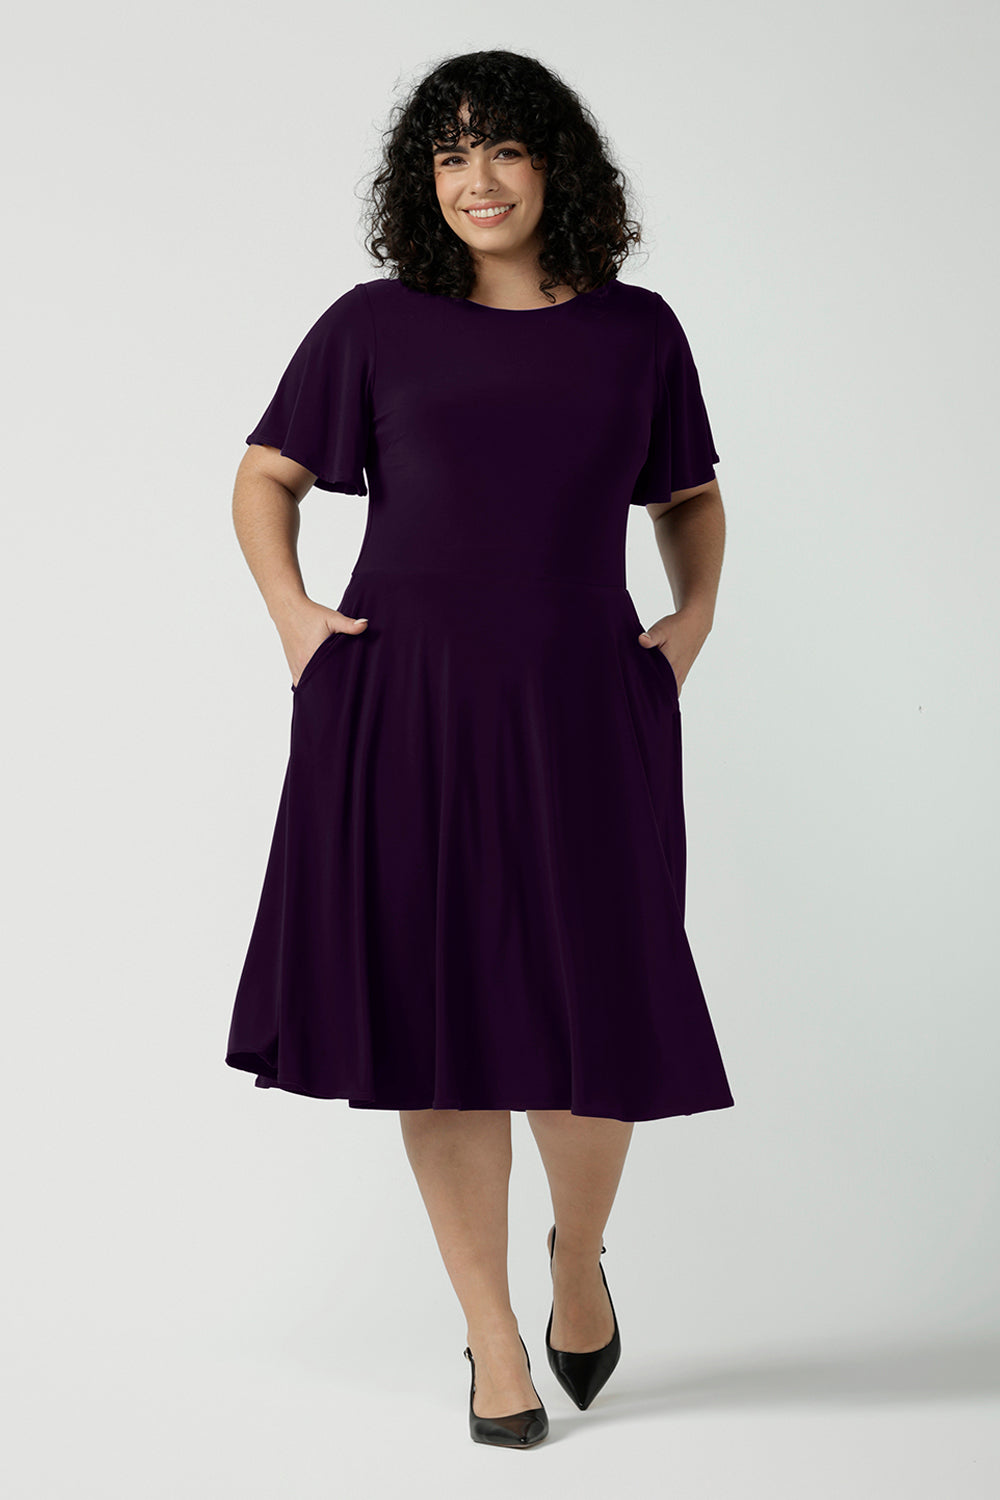 Monique dress in Amethyst. Jersey dress with flutter sleeve and rounded neckline. Full circle skirt and pockets. Made in Australia for women size 8 - 24.